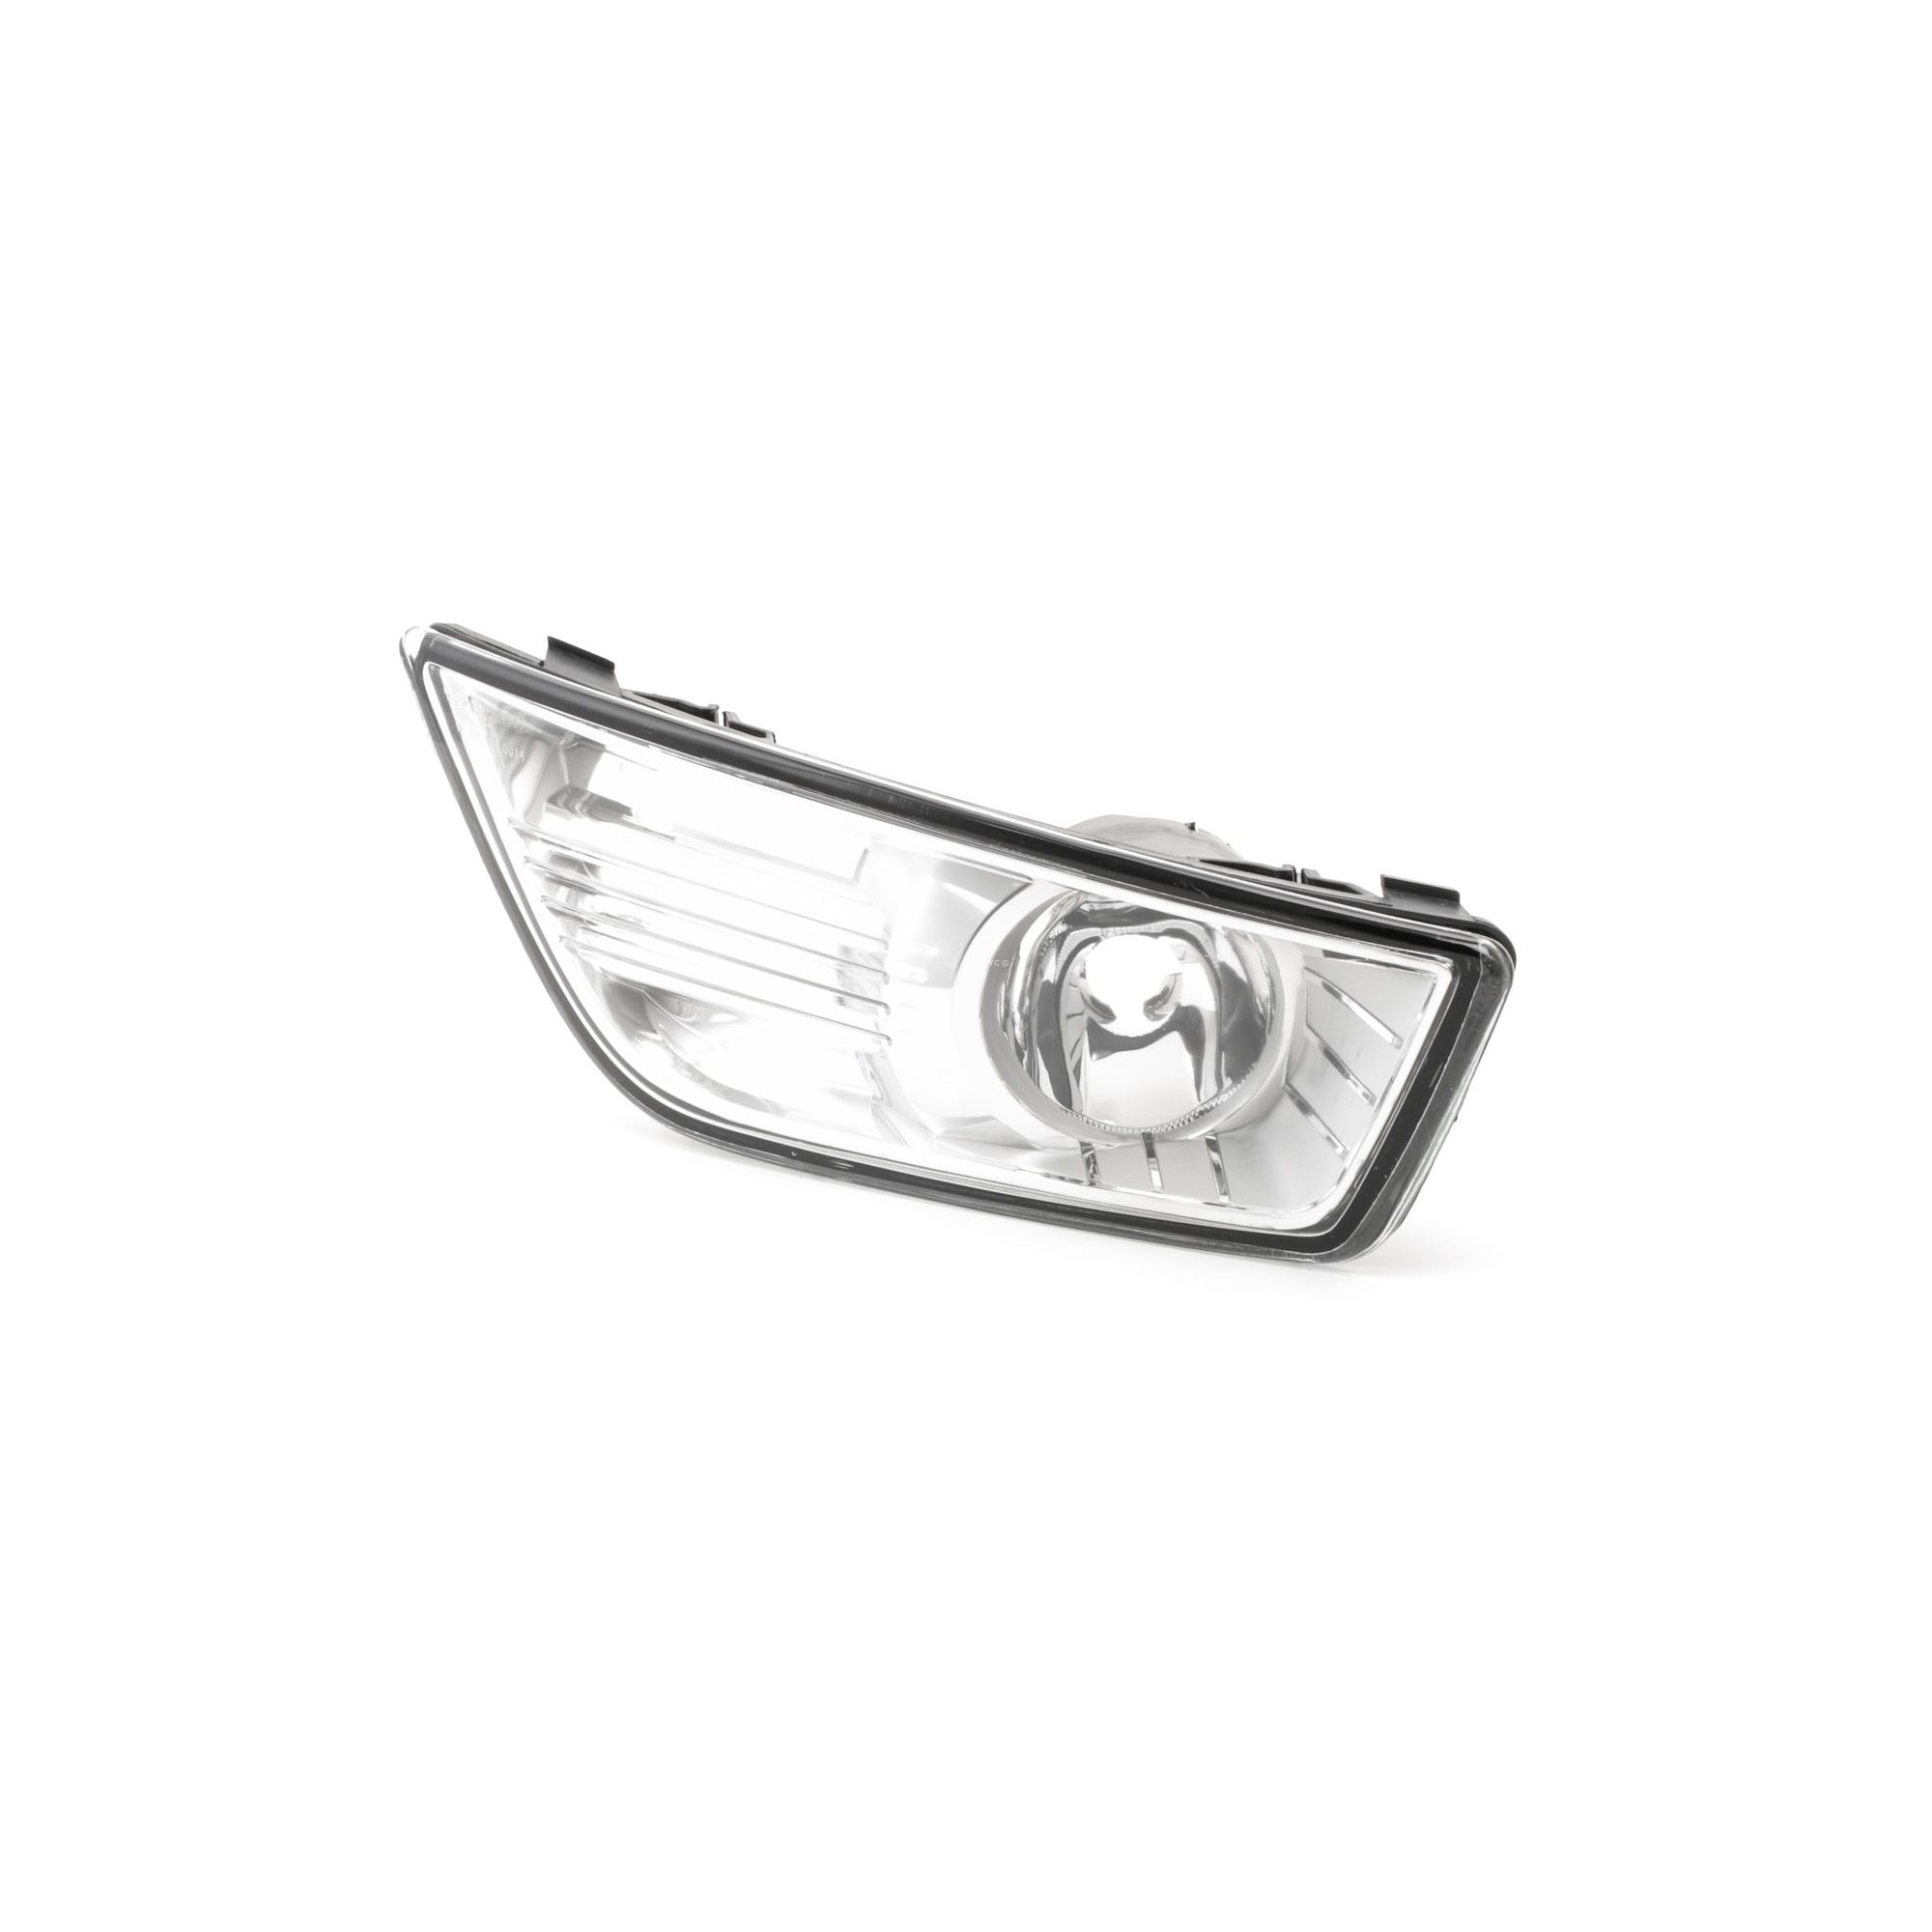 Original TYC Fog lamps 19-0707-01-2 for FORD TRANSIT